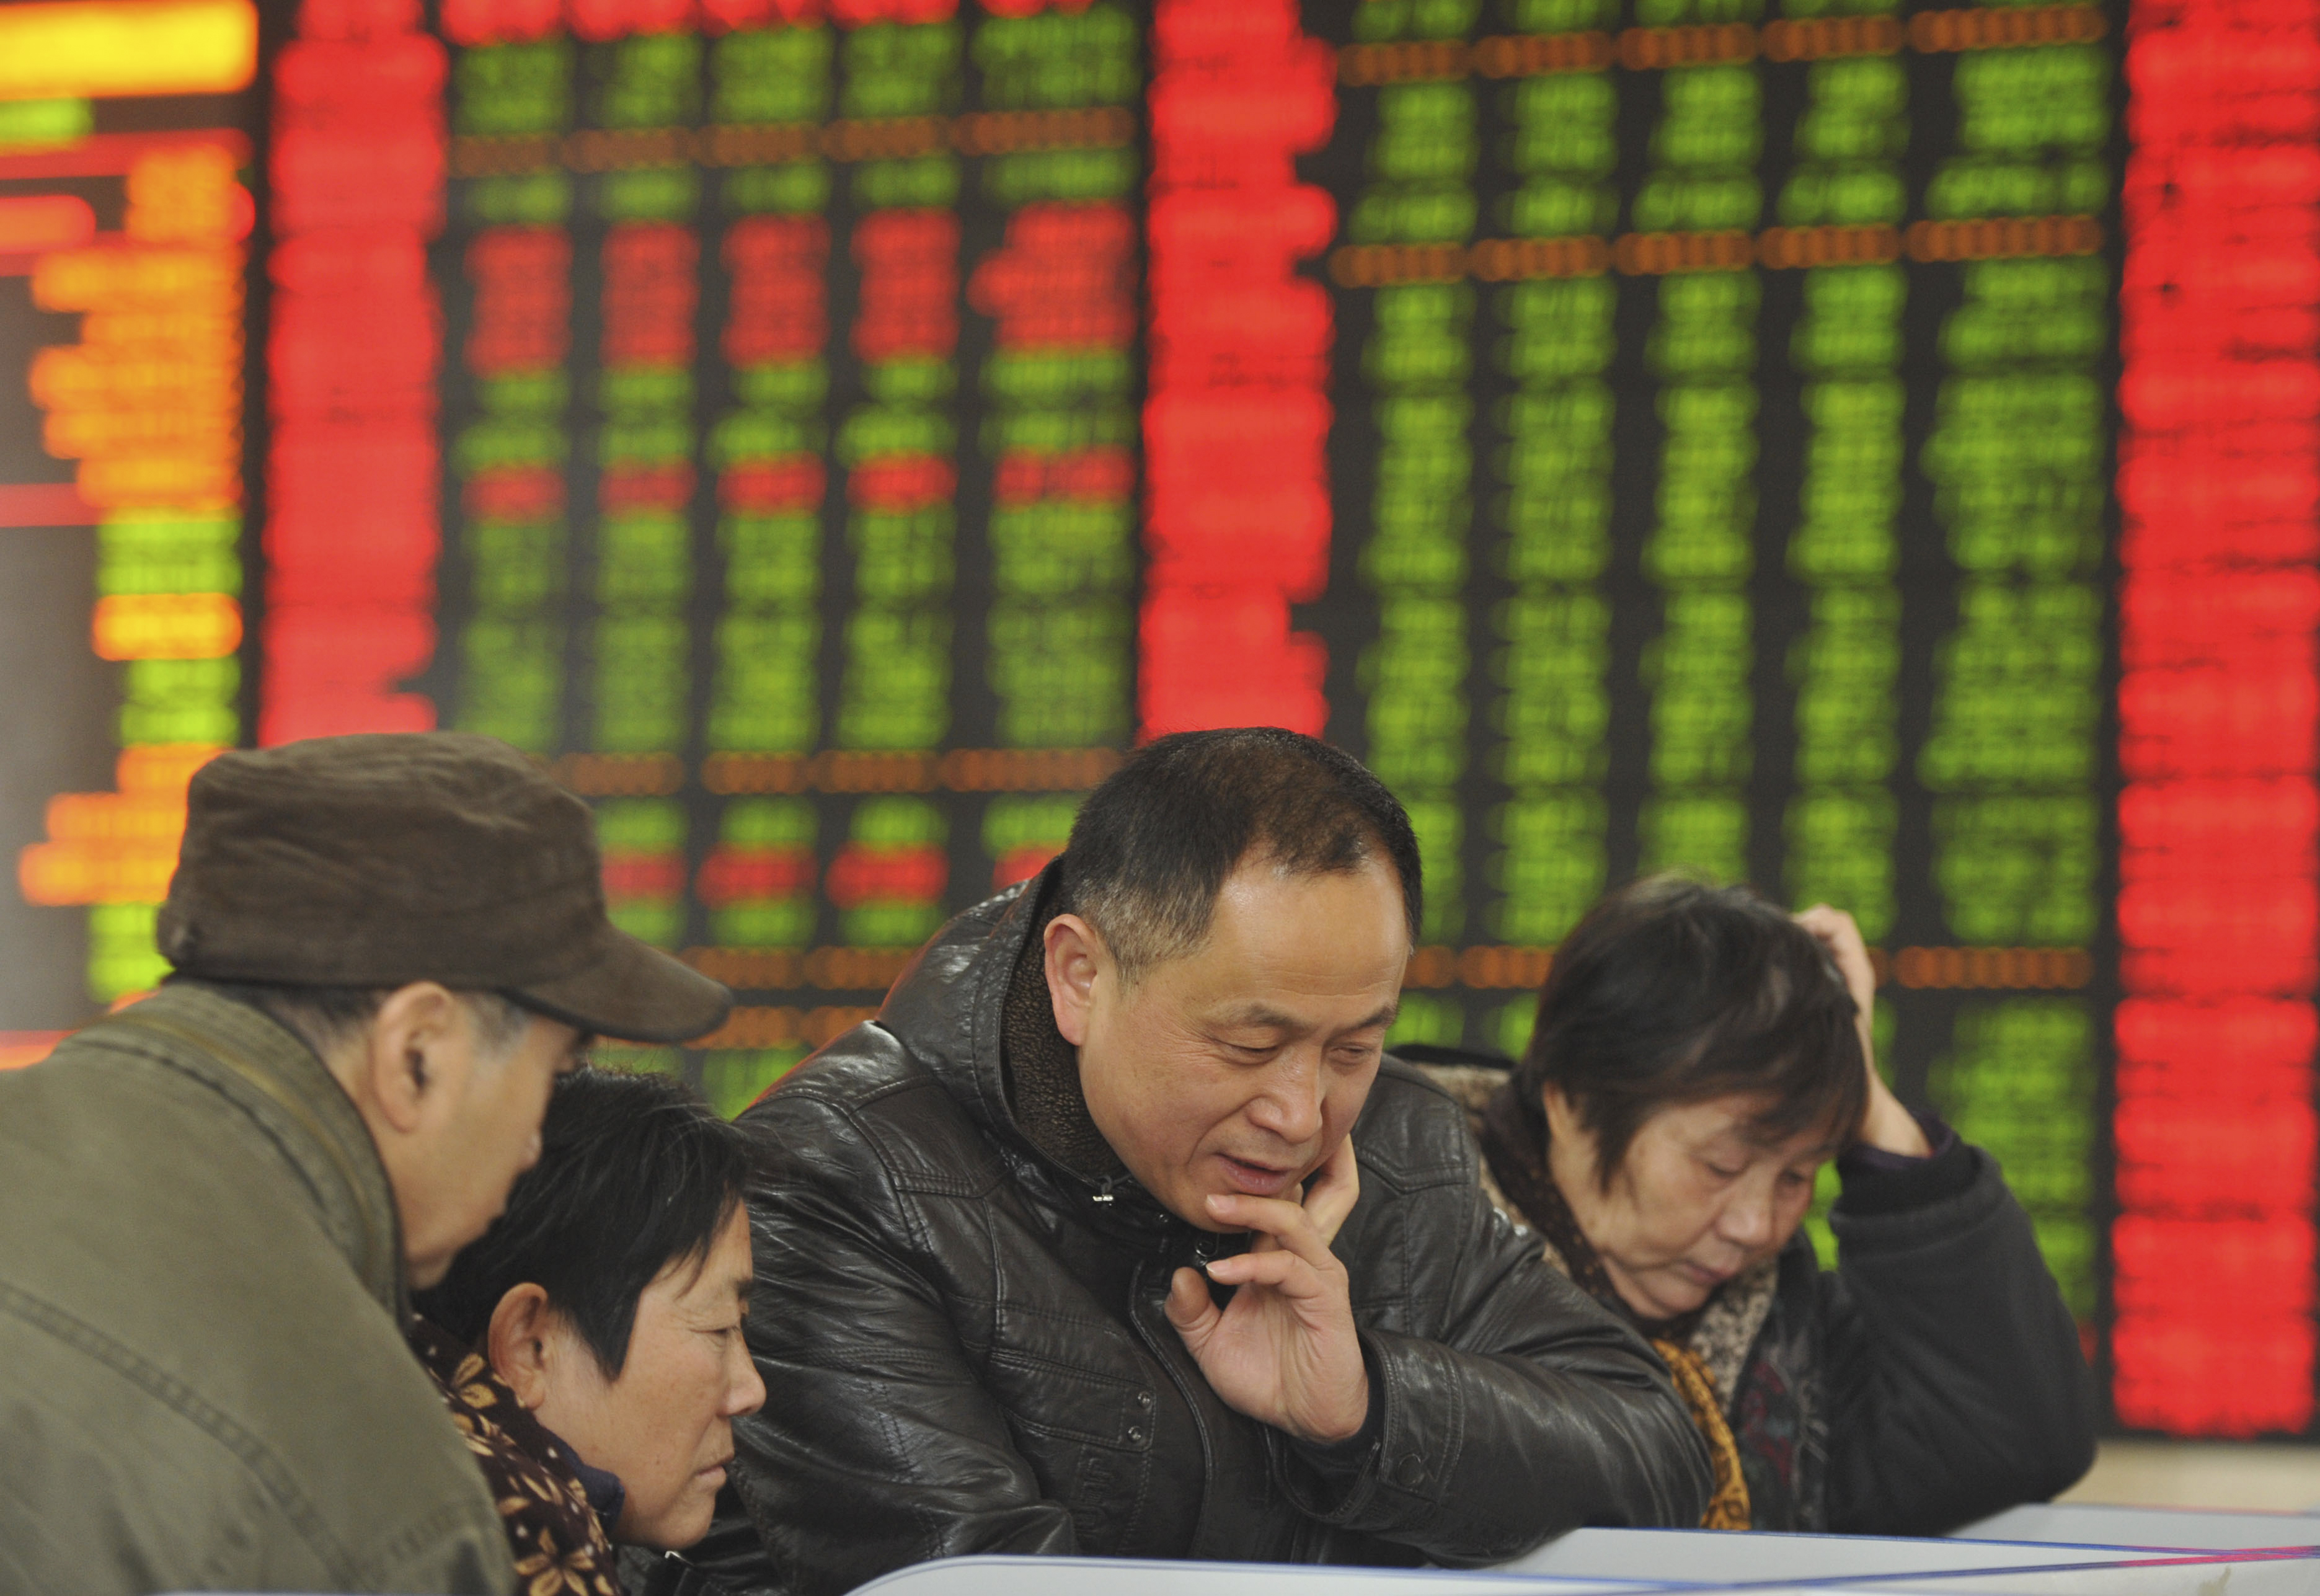 FILE - In this Friday, Nov. 27, 2015, file photo, Chinese investors monitor stock prices at a brokerage house in Fuyang in central China's Anhui province. China's sharp economic slowdown and its surprise decision to devalue its currency squeeze emerging economies, roil financial markets and escalate fears about the global economy was one of The Associated Press' top stories in 2015. (Chinatopix via AP) CHINA OUT